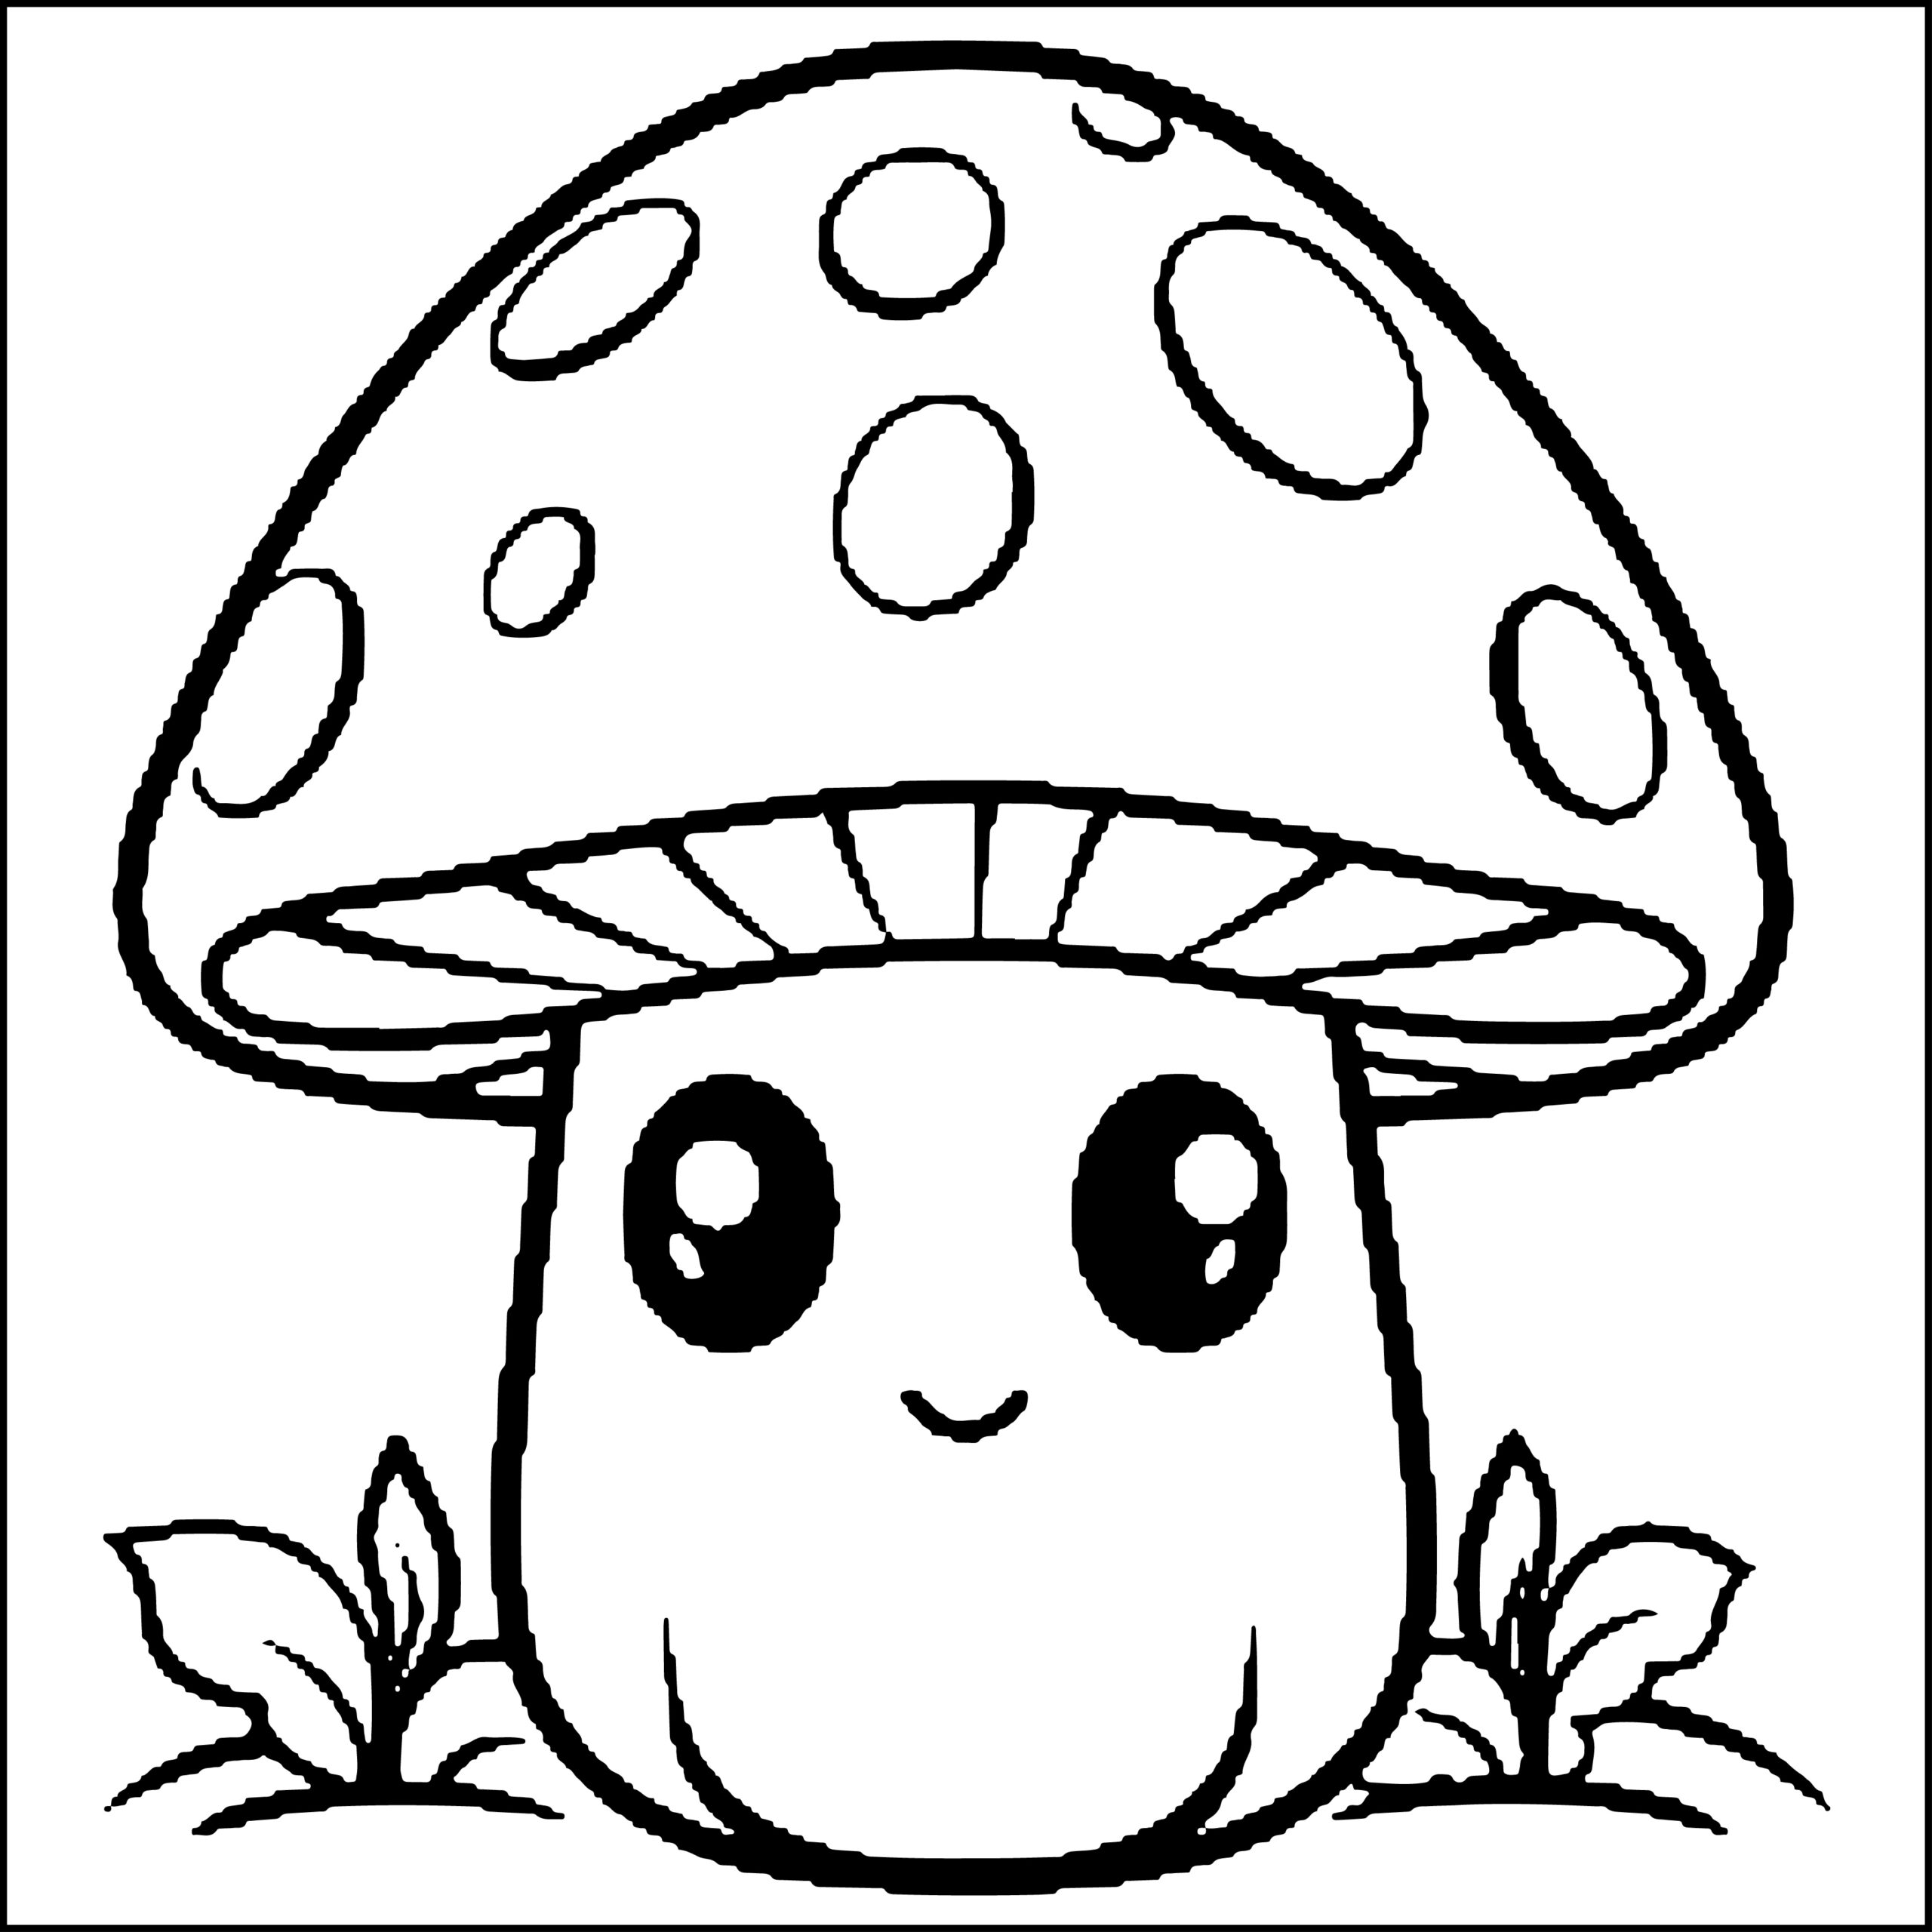 Cute mushrooms coloring book cute simple coloring pages made by teachers